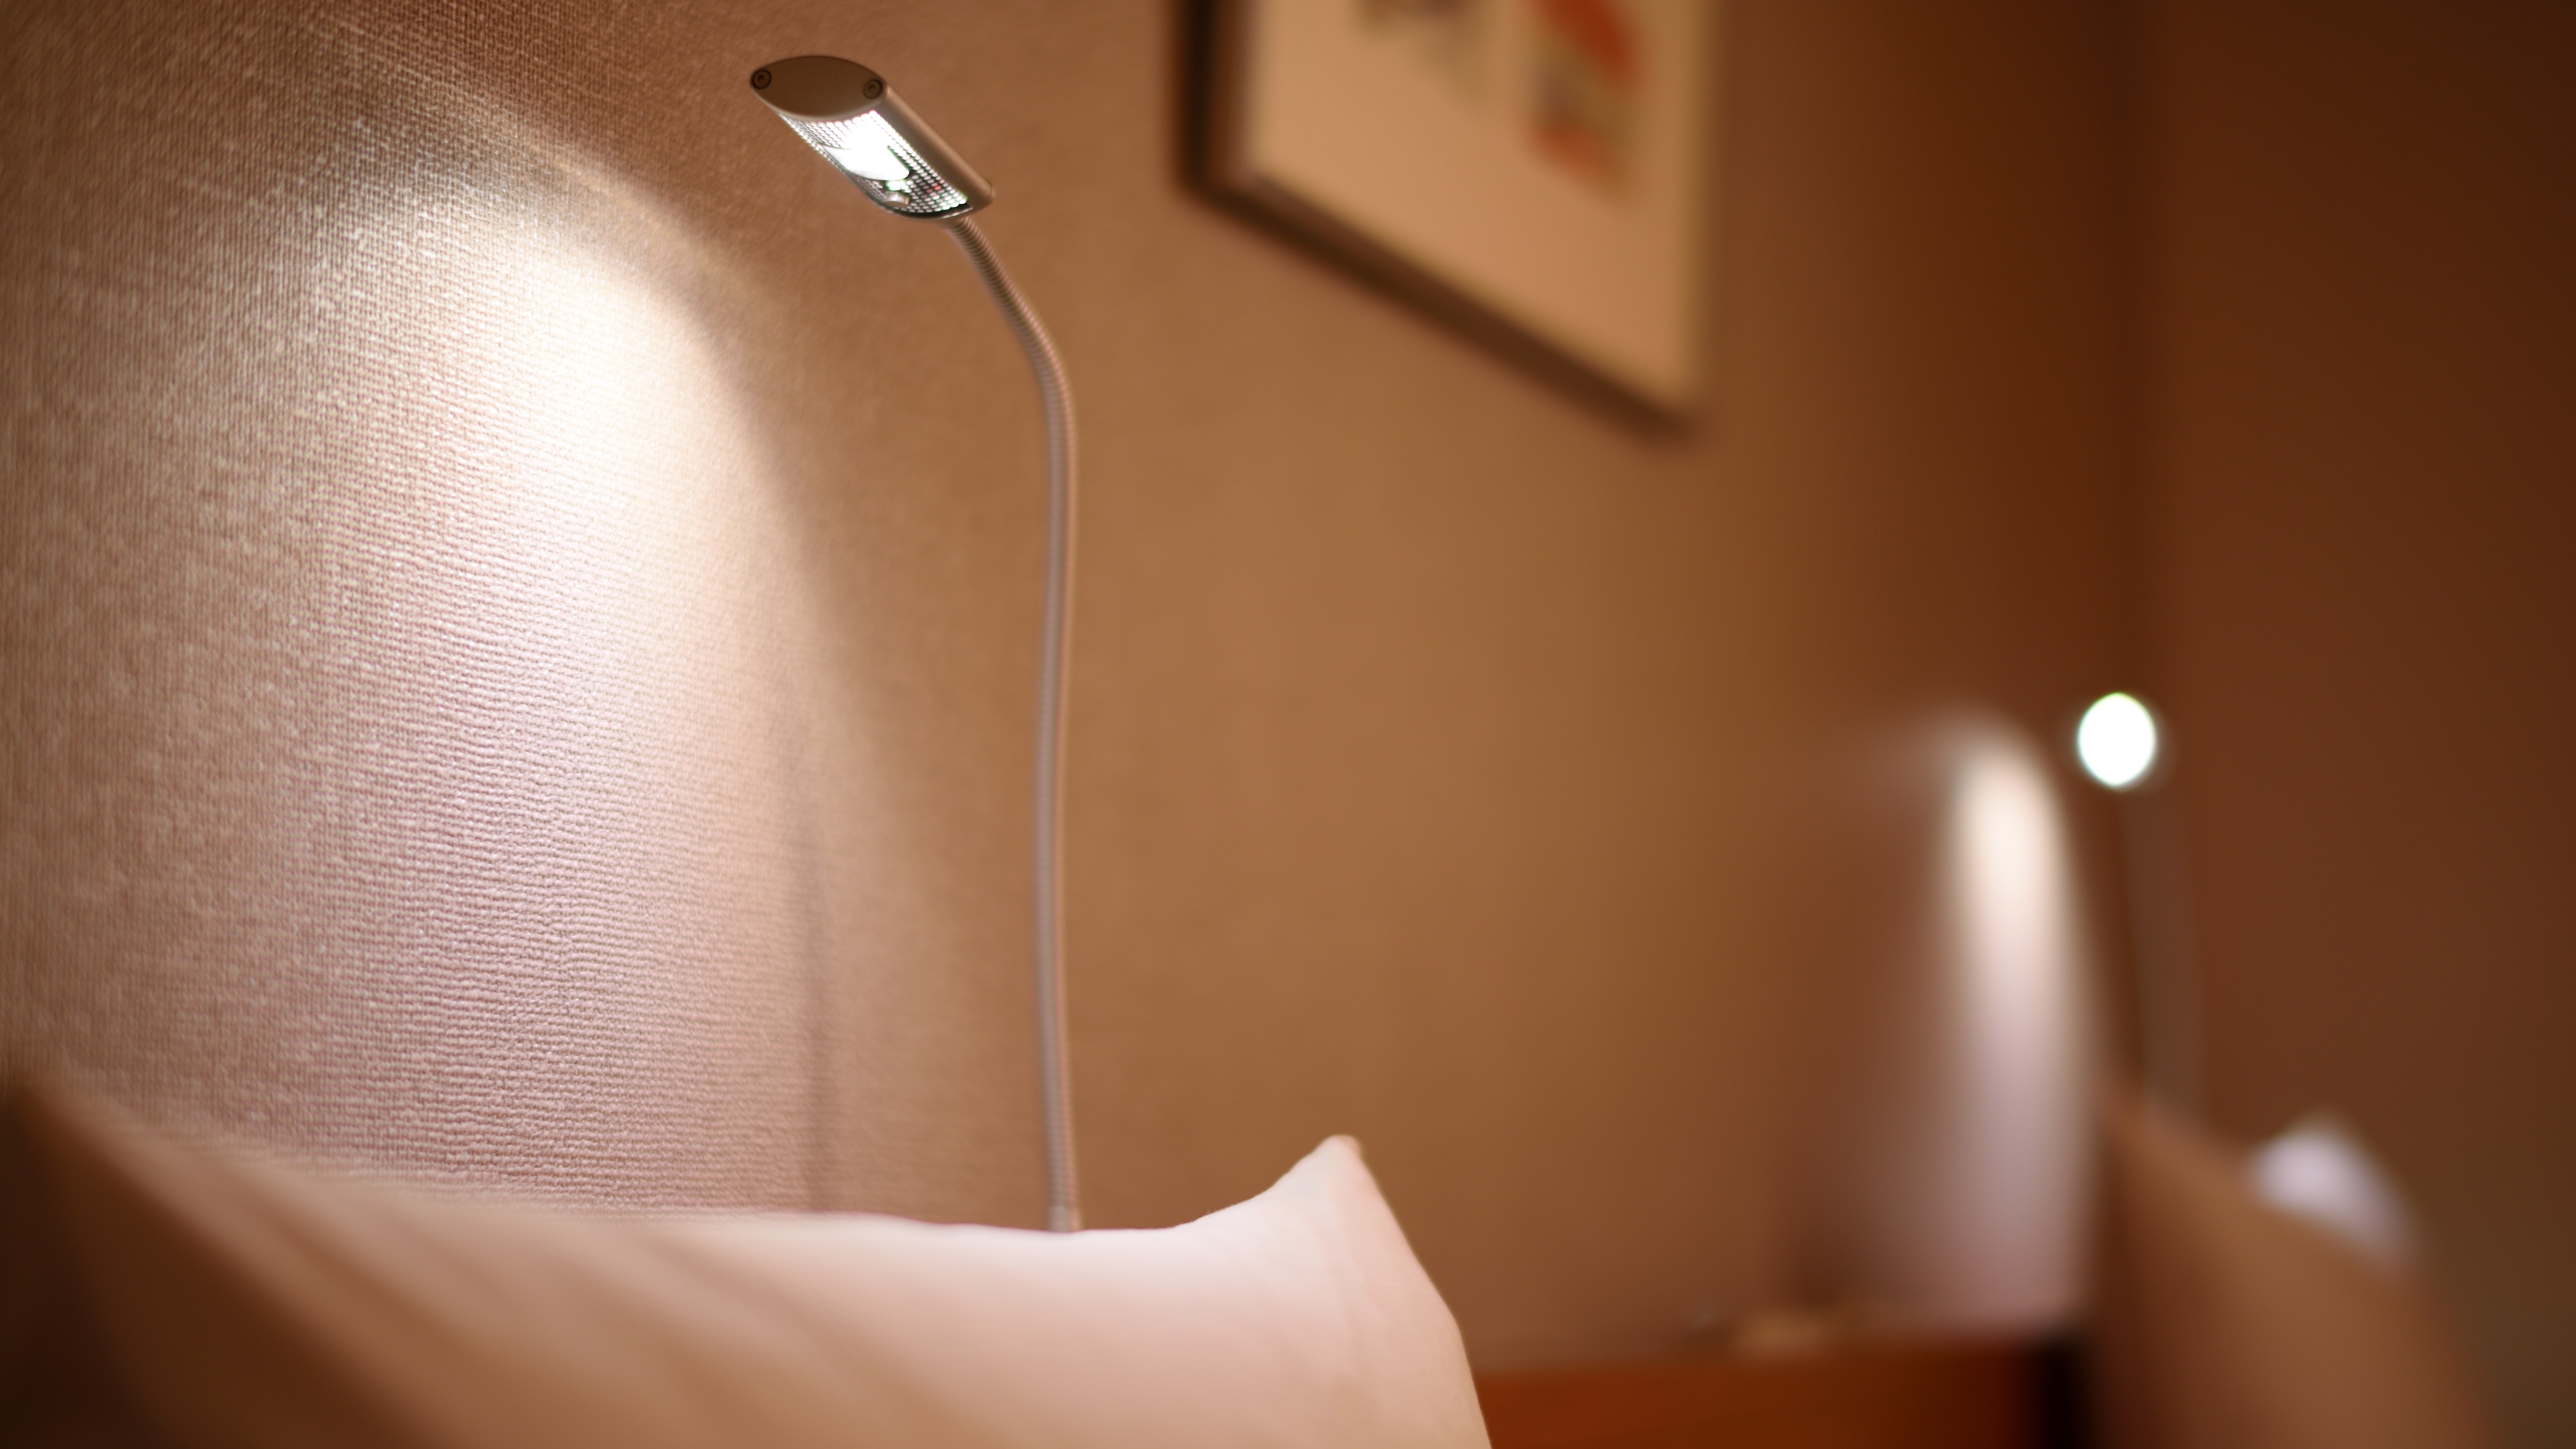 [Enjoy reading slowly] A bright and easy-to-read reading light for your own reading time.